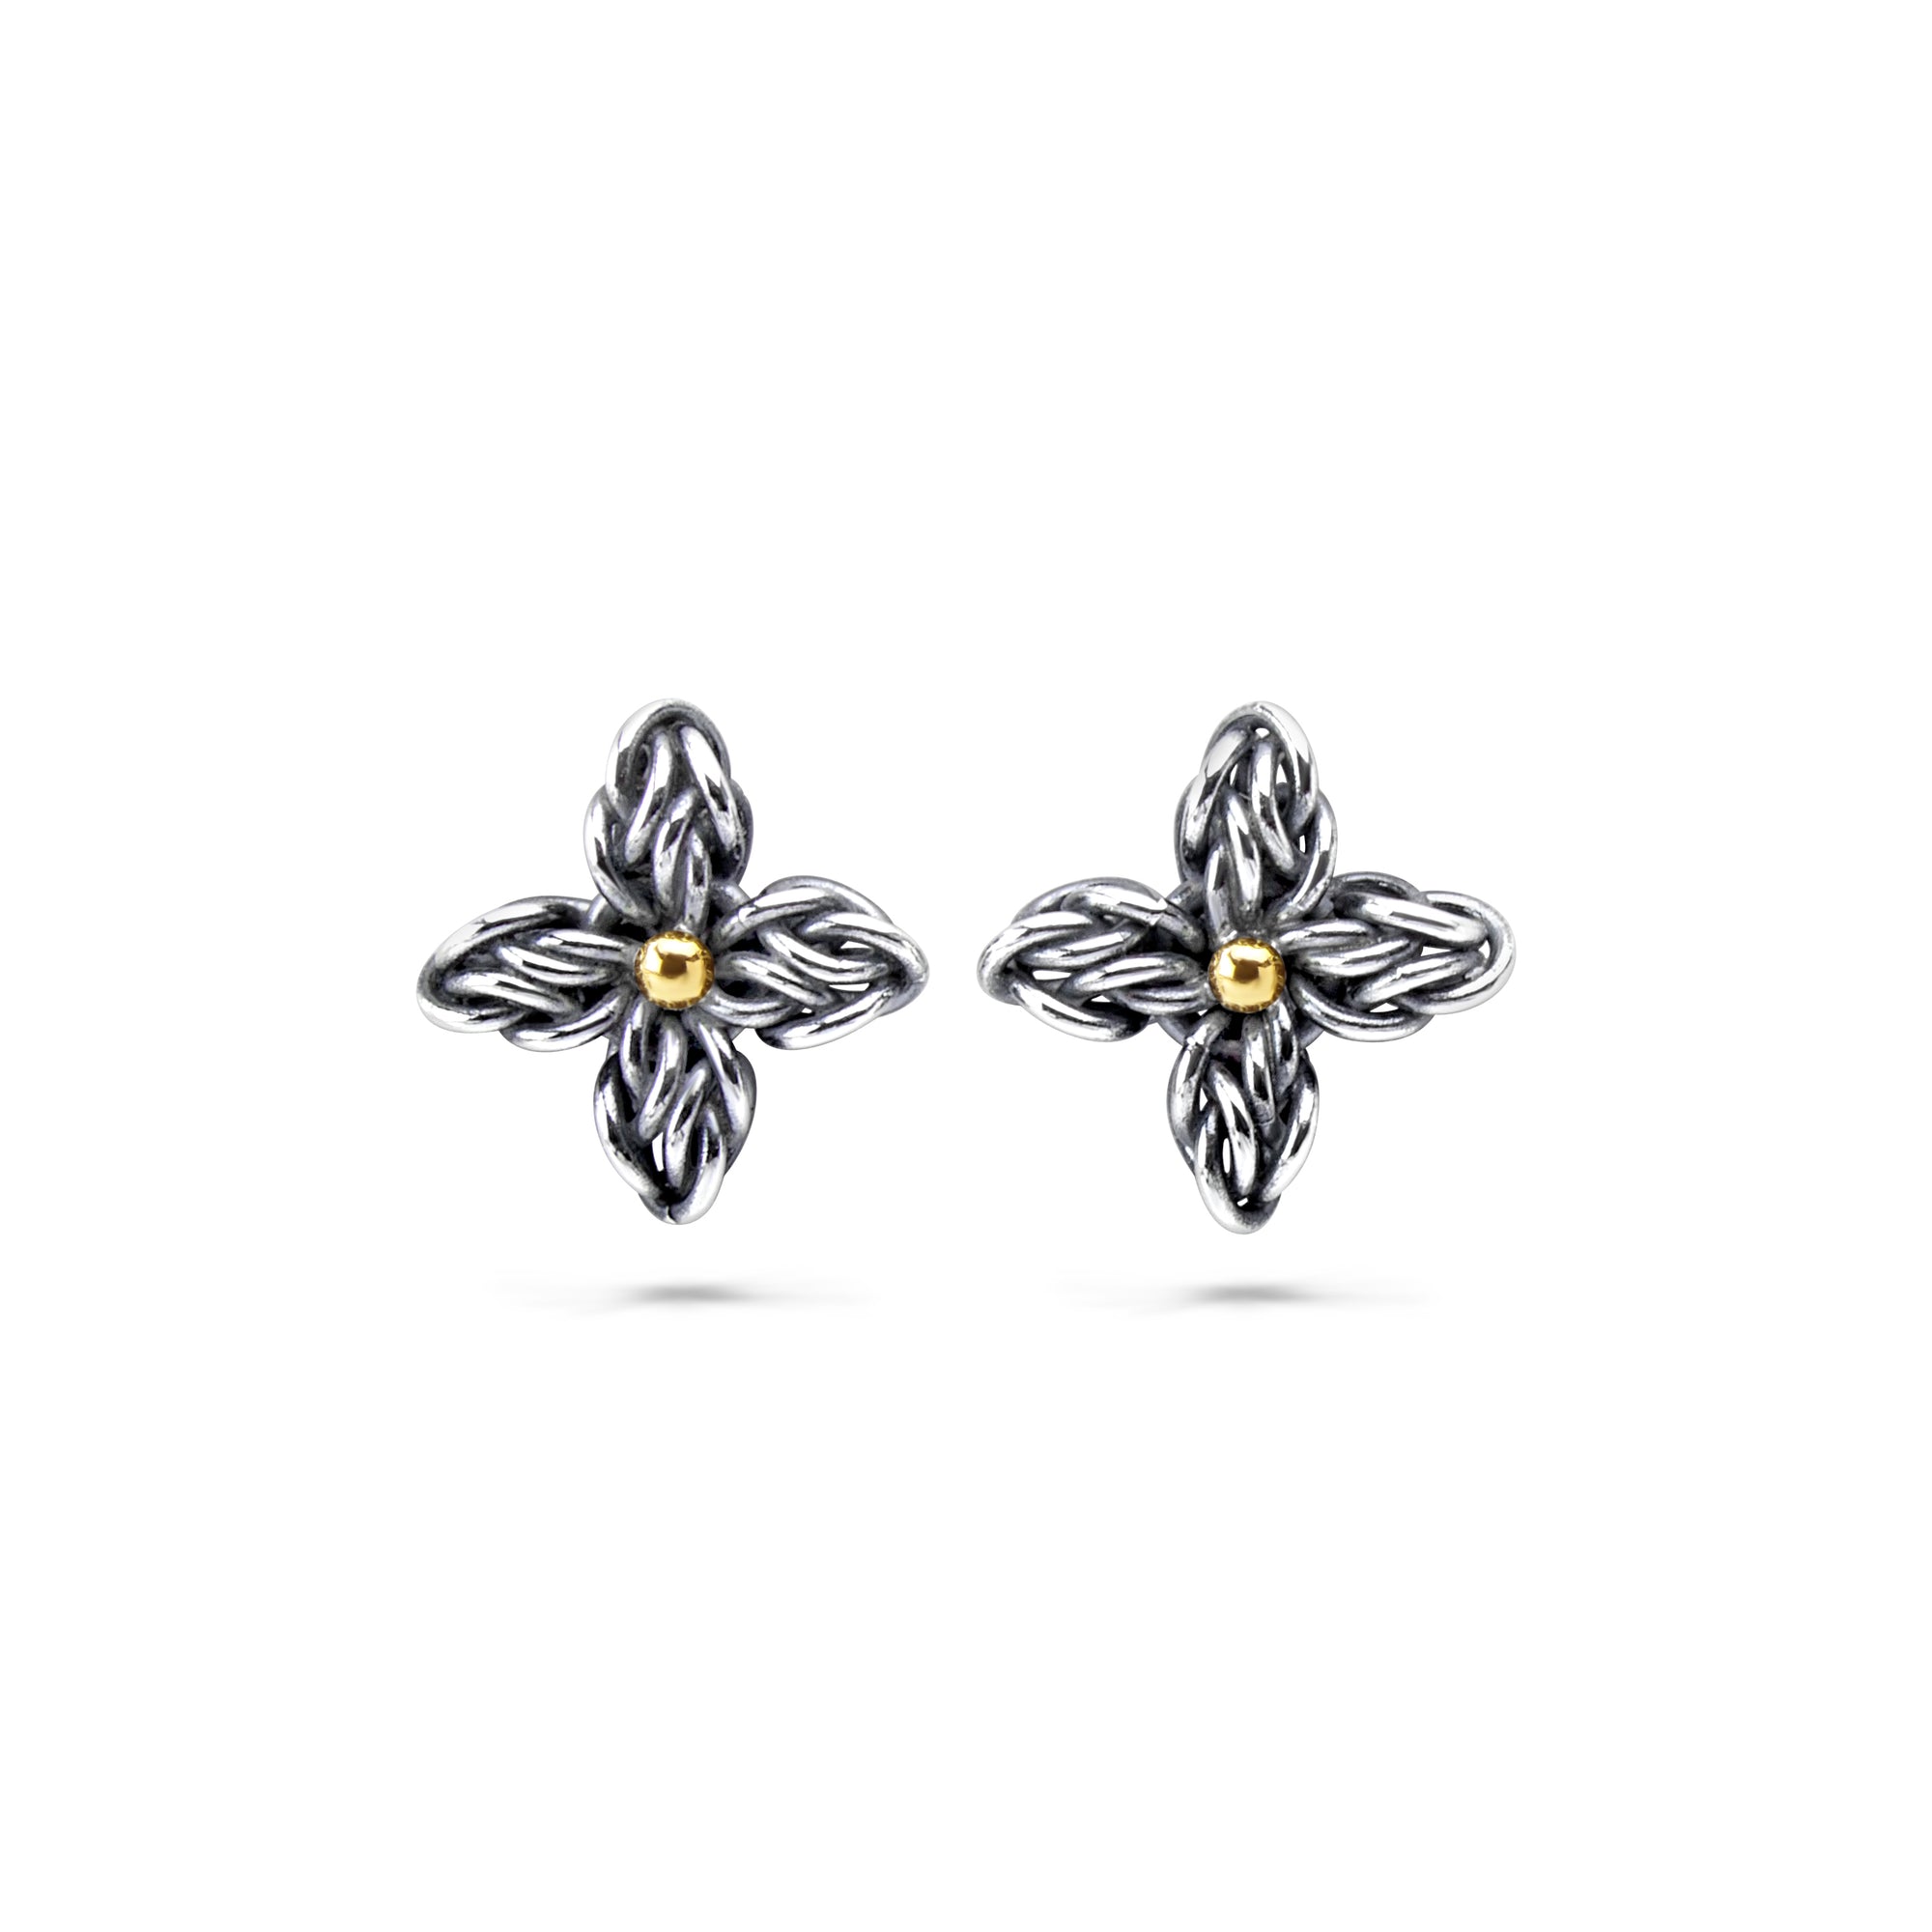 "Star Flower" Fused Chainmaille Post Earrings, Petite